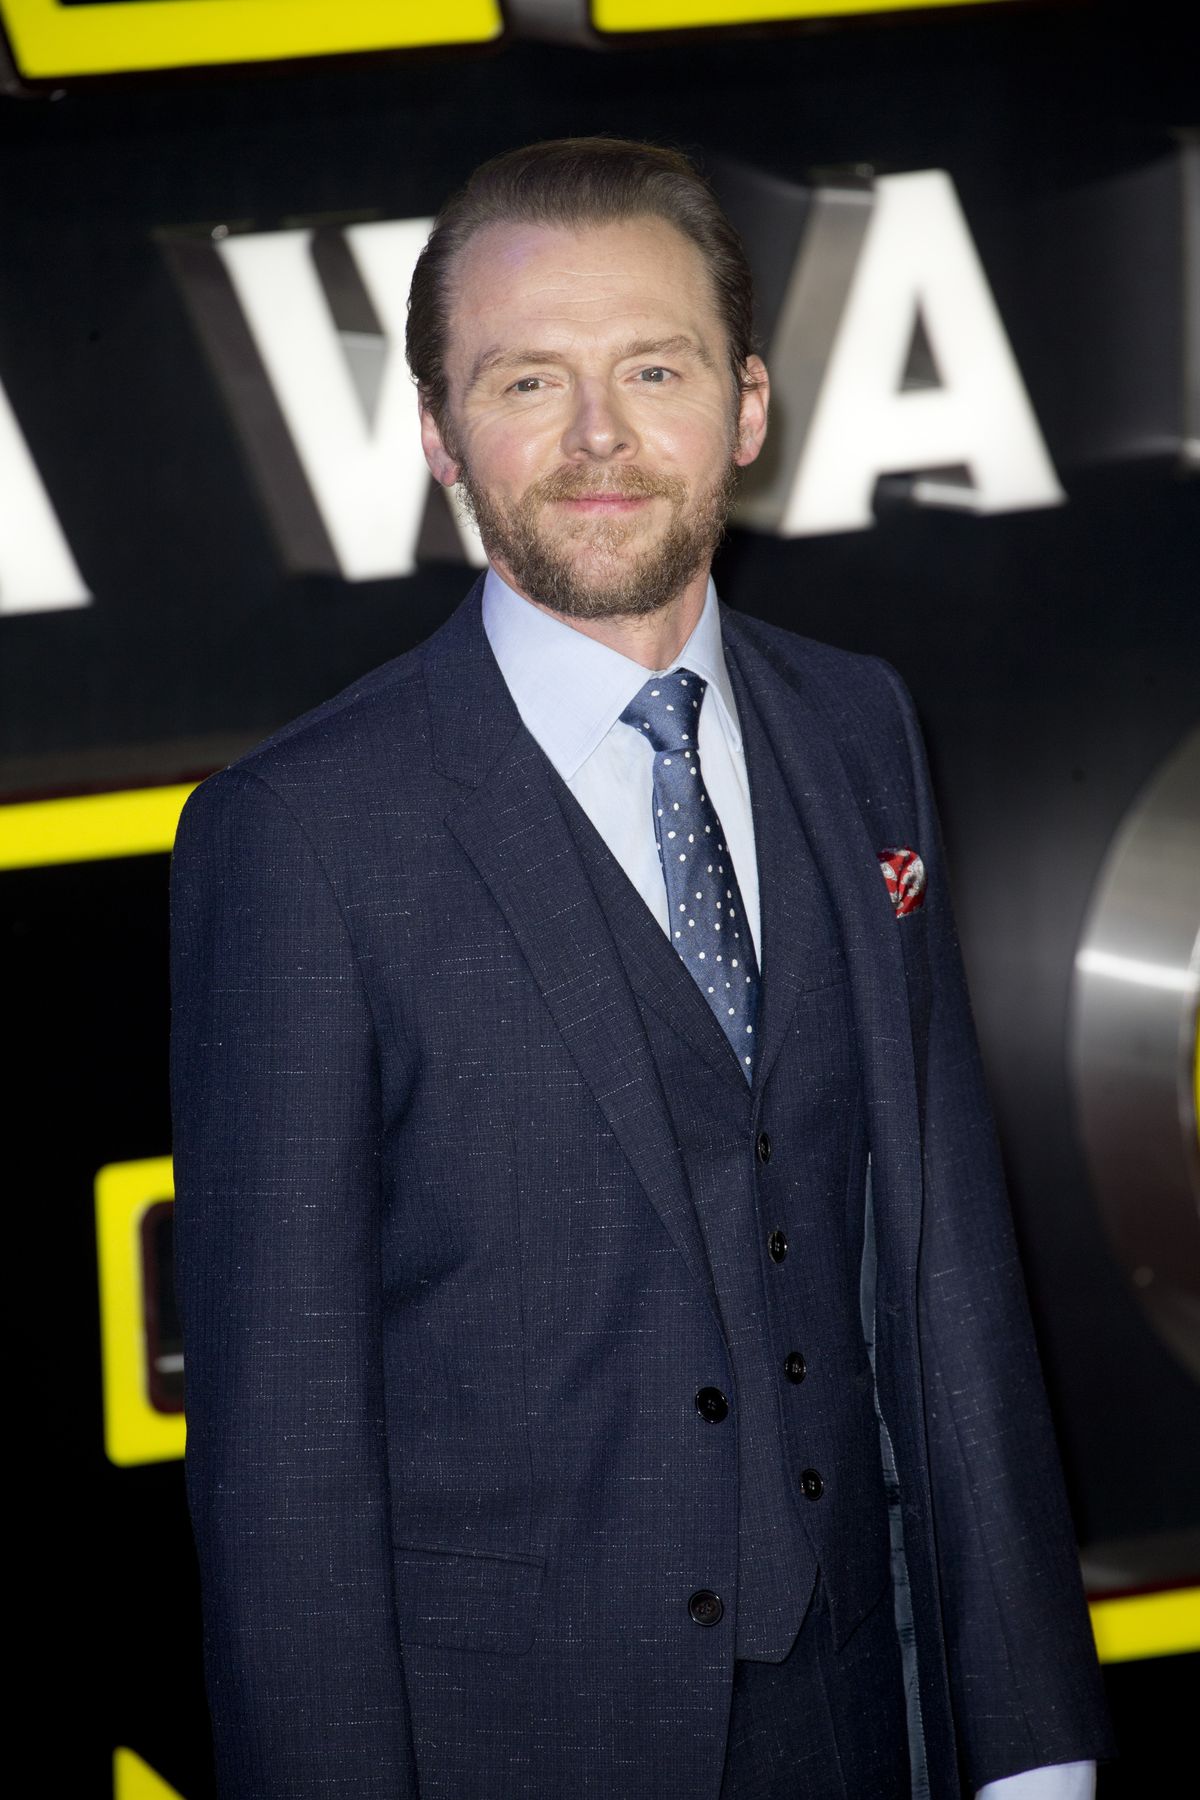 simon pegg attends the european premiere of star wars the force awakens